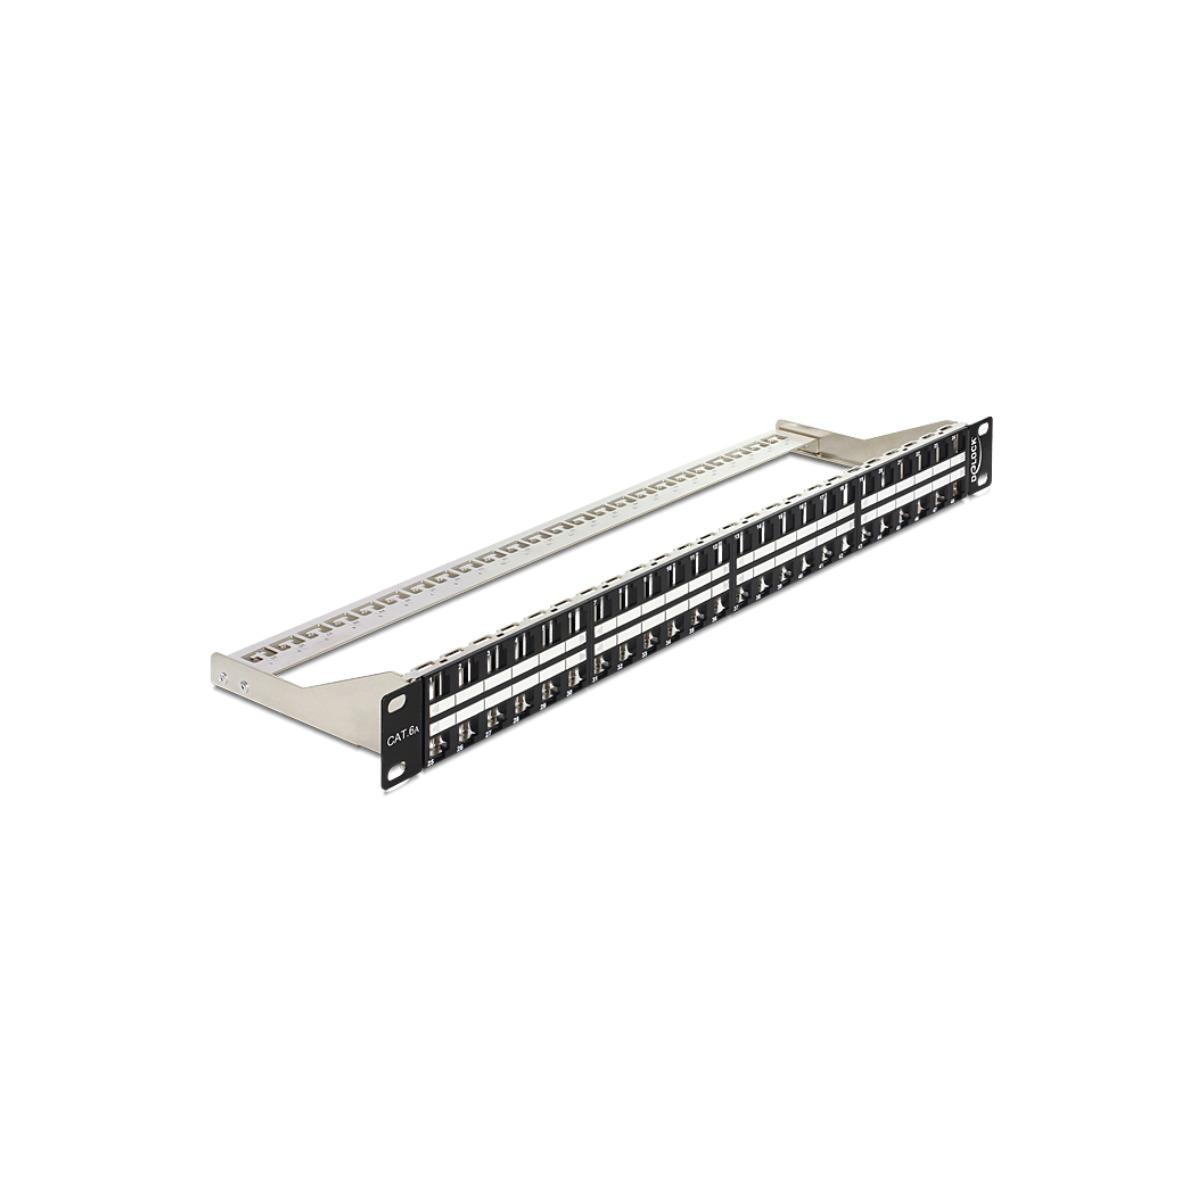 DELOCK Patchpanel 43280